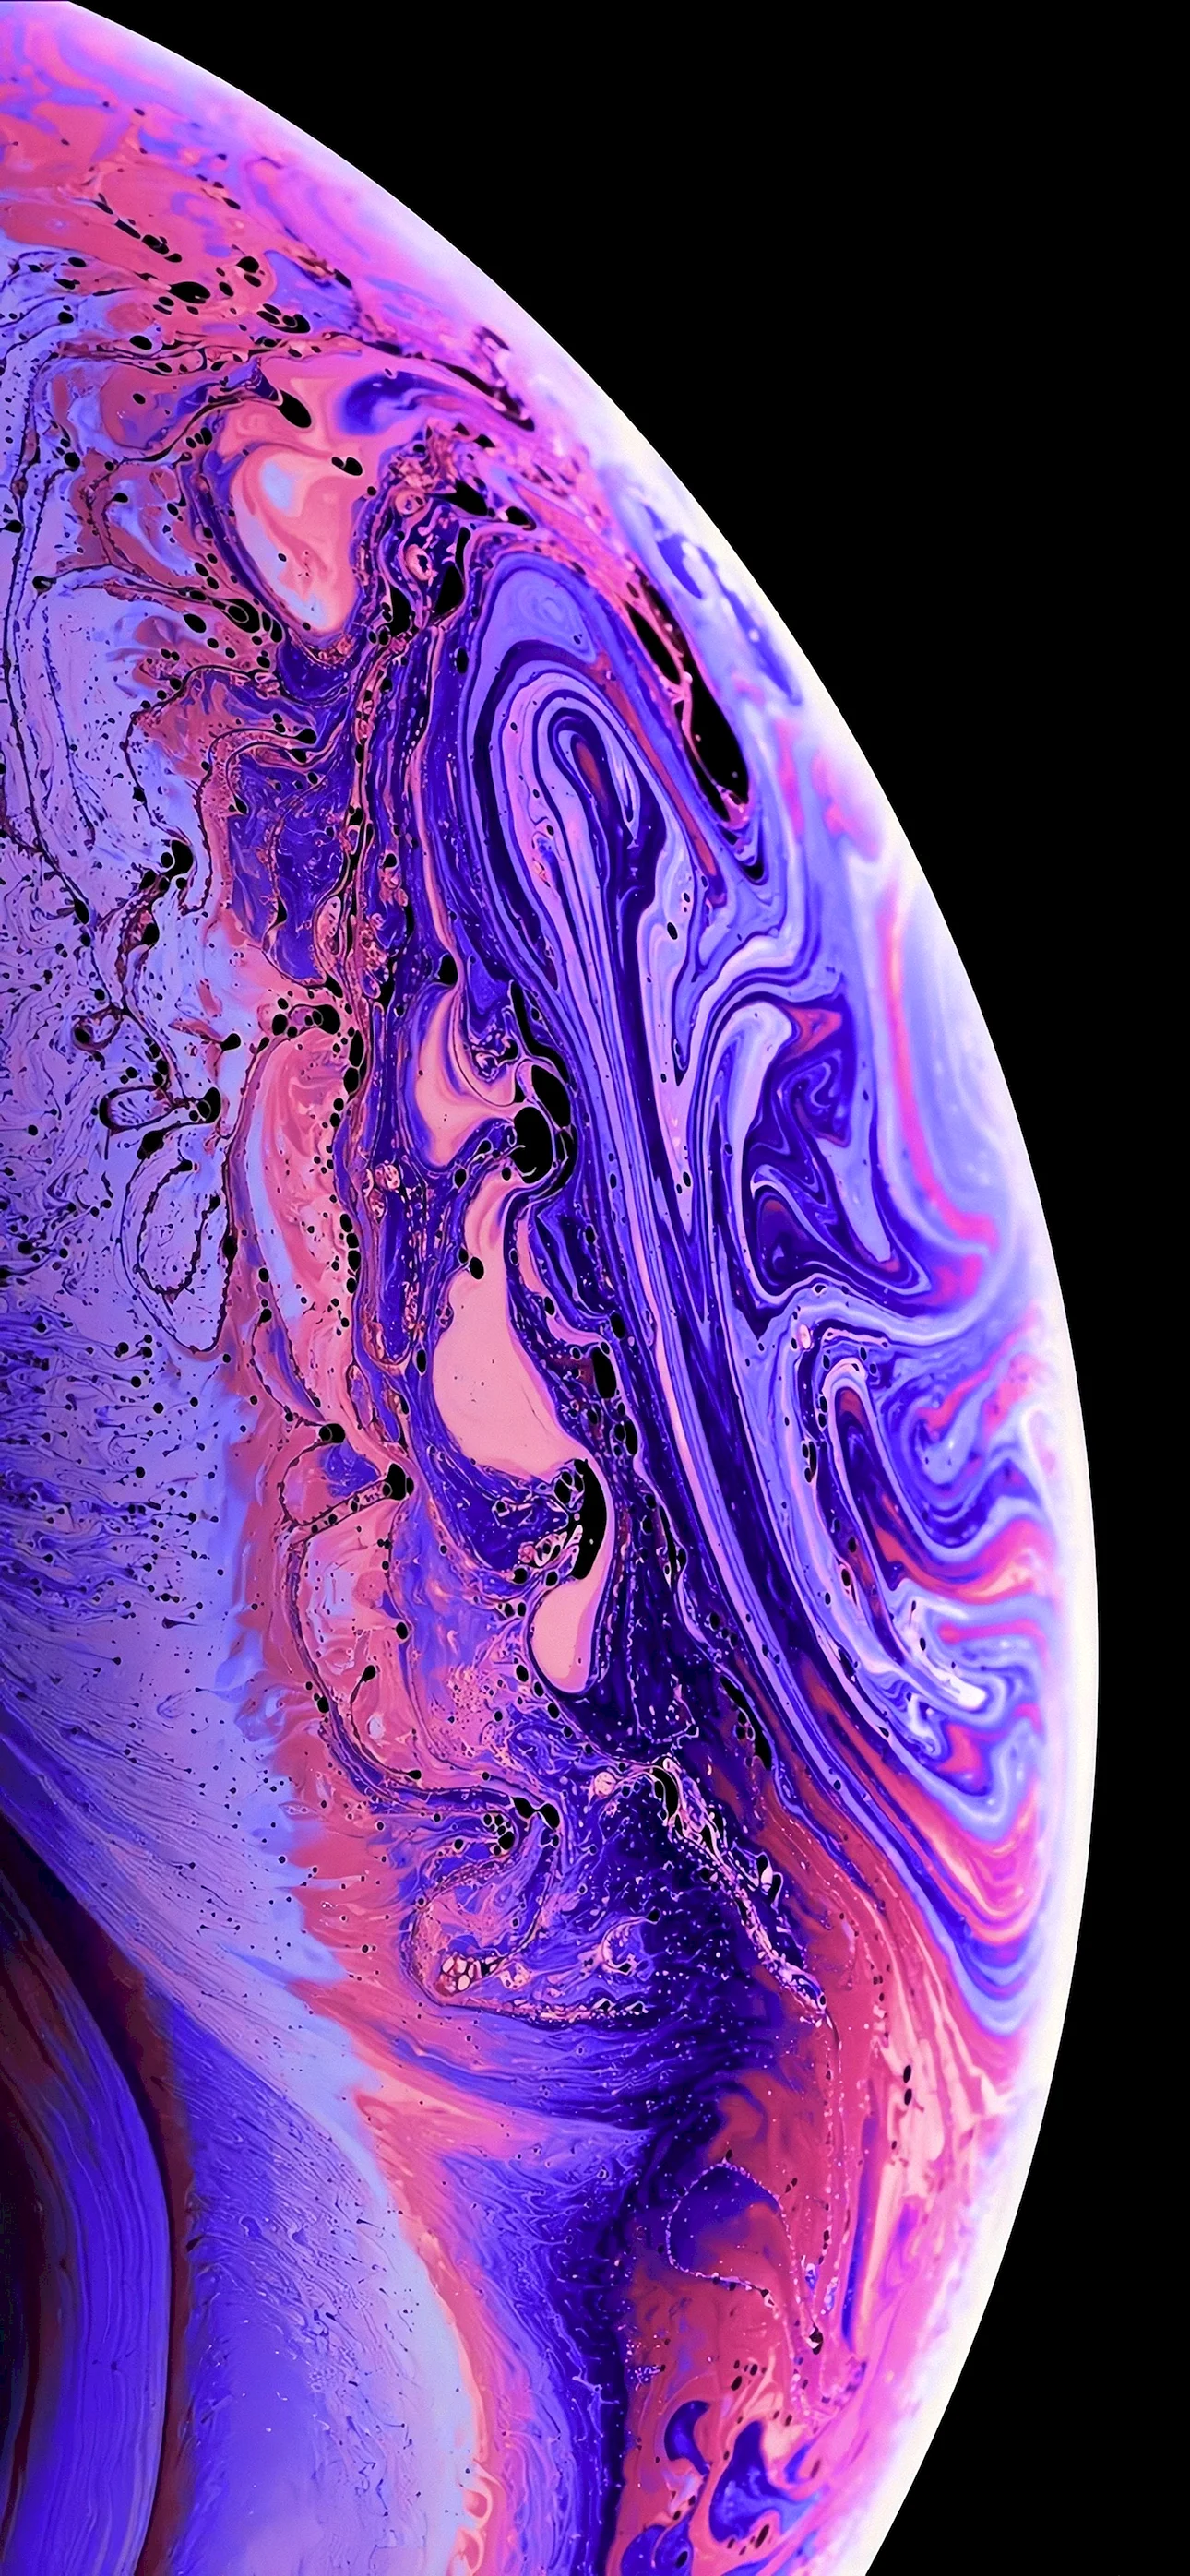 iPhone Xs 4K Wallpaper For iPhone